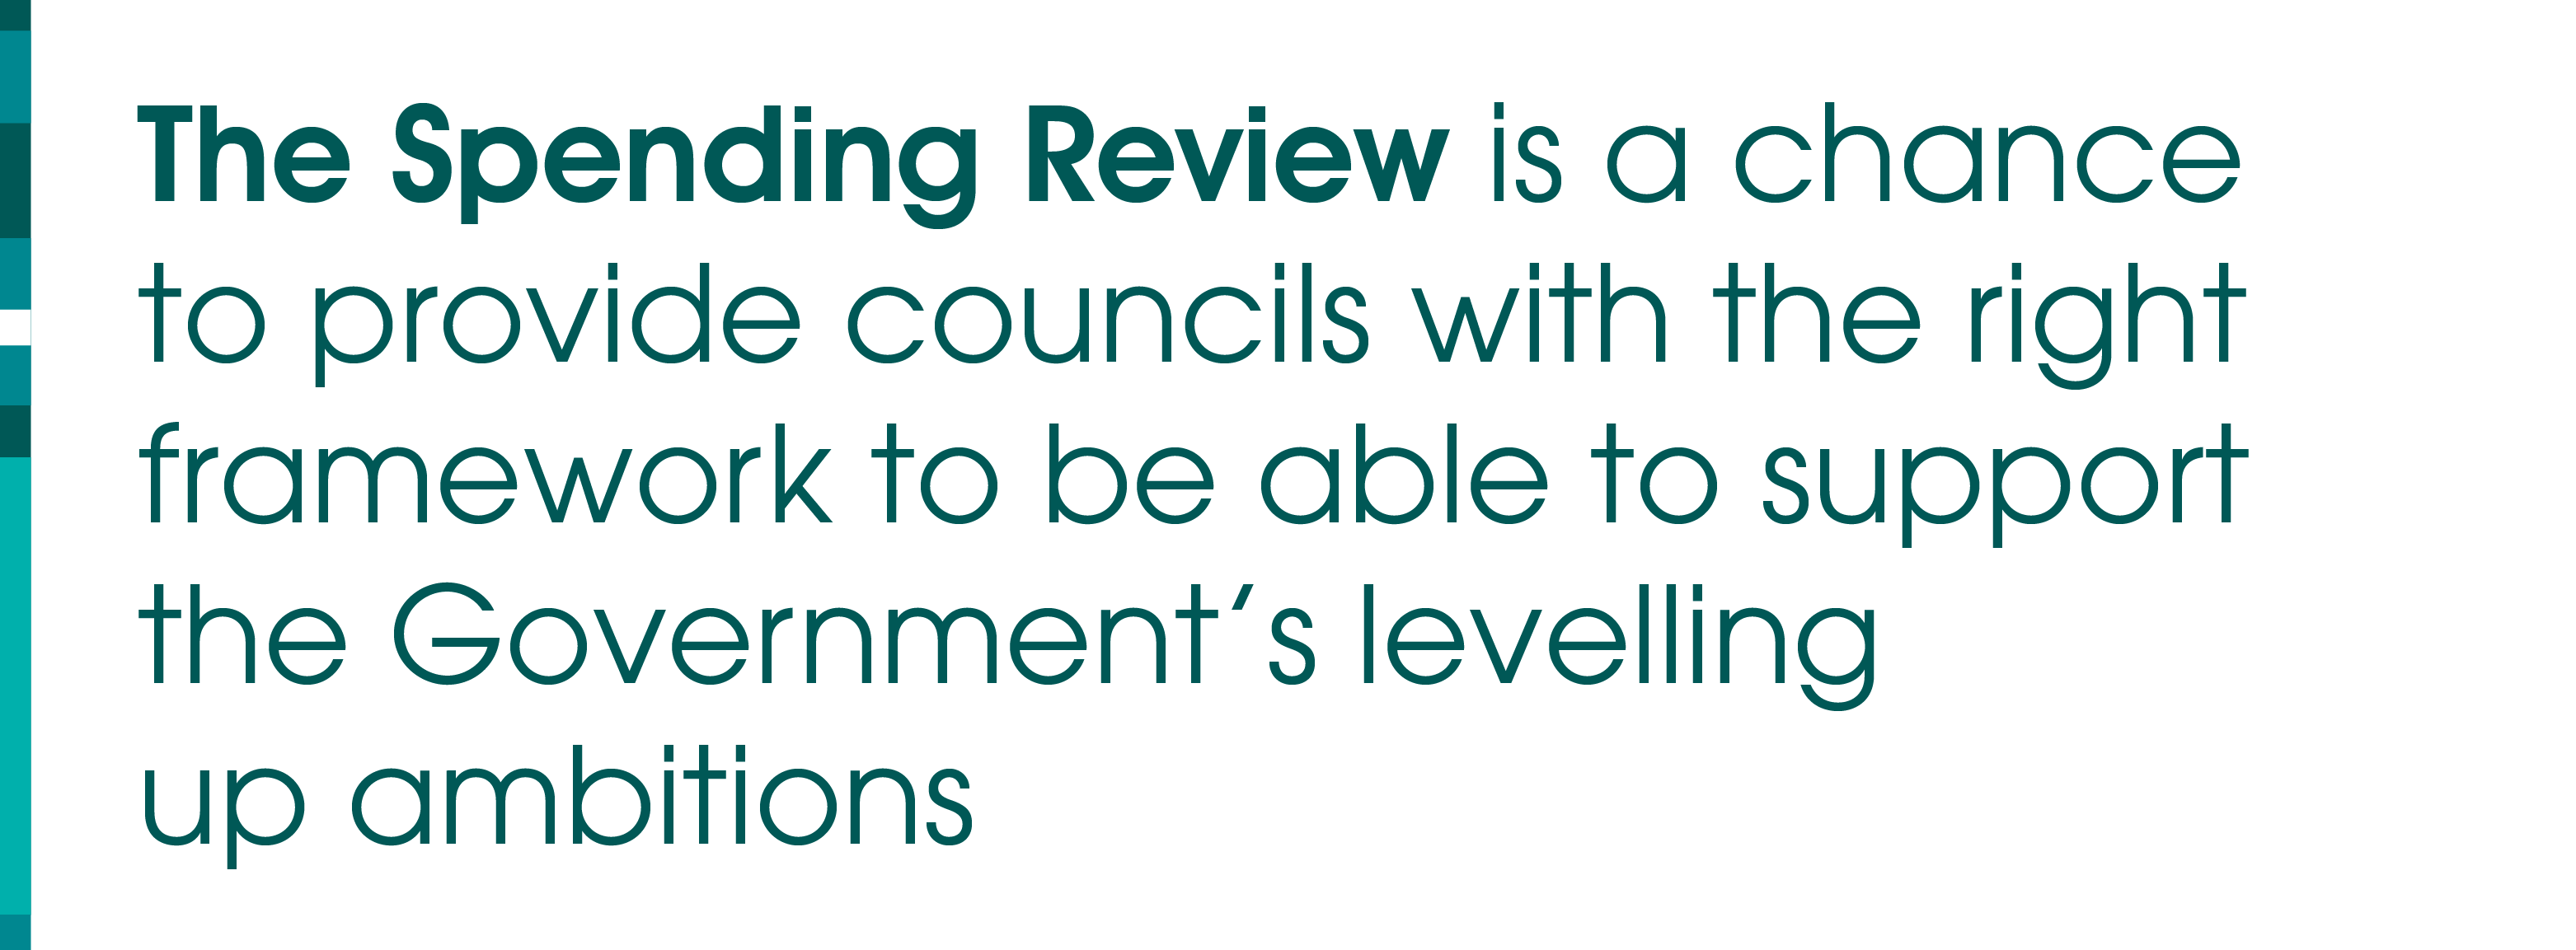 The Spending Review is a chance to provide councils with the right framework to be able to support the Government’s levelling up ambitions.